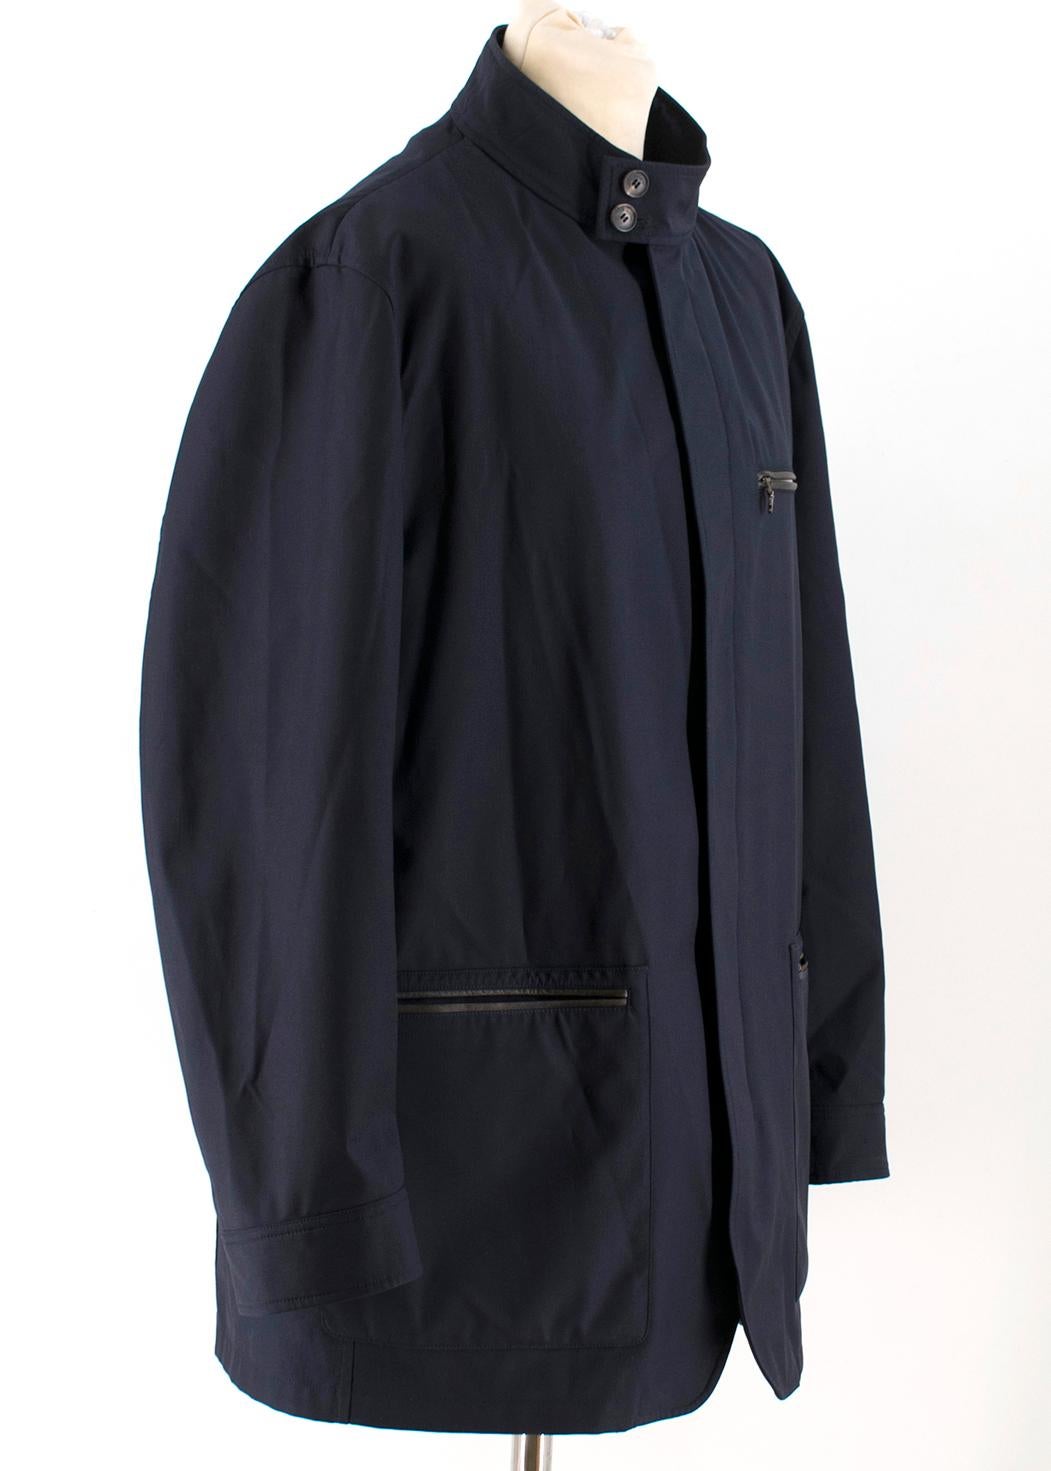 Salvatore Ferragamo Navy Padded Trench Coat  

- Navy medium length coat made in technical fabric
- The coat has removable padded vest with zip fastening
- Zip closure
- Two button fastening of collar stand
- Cotton Collar insert inside
- Two large